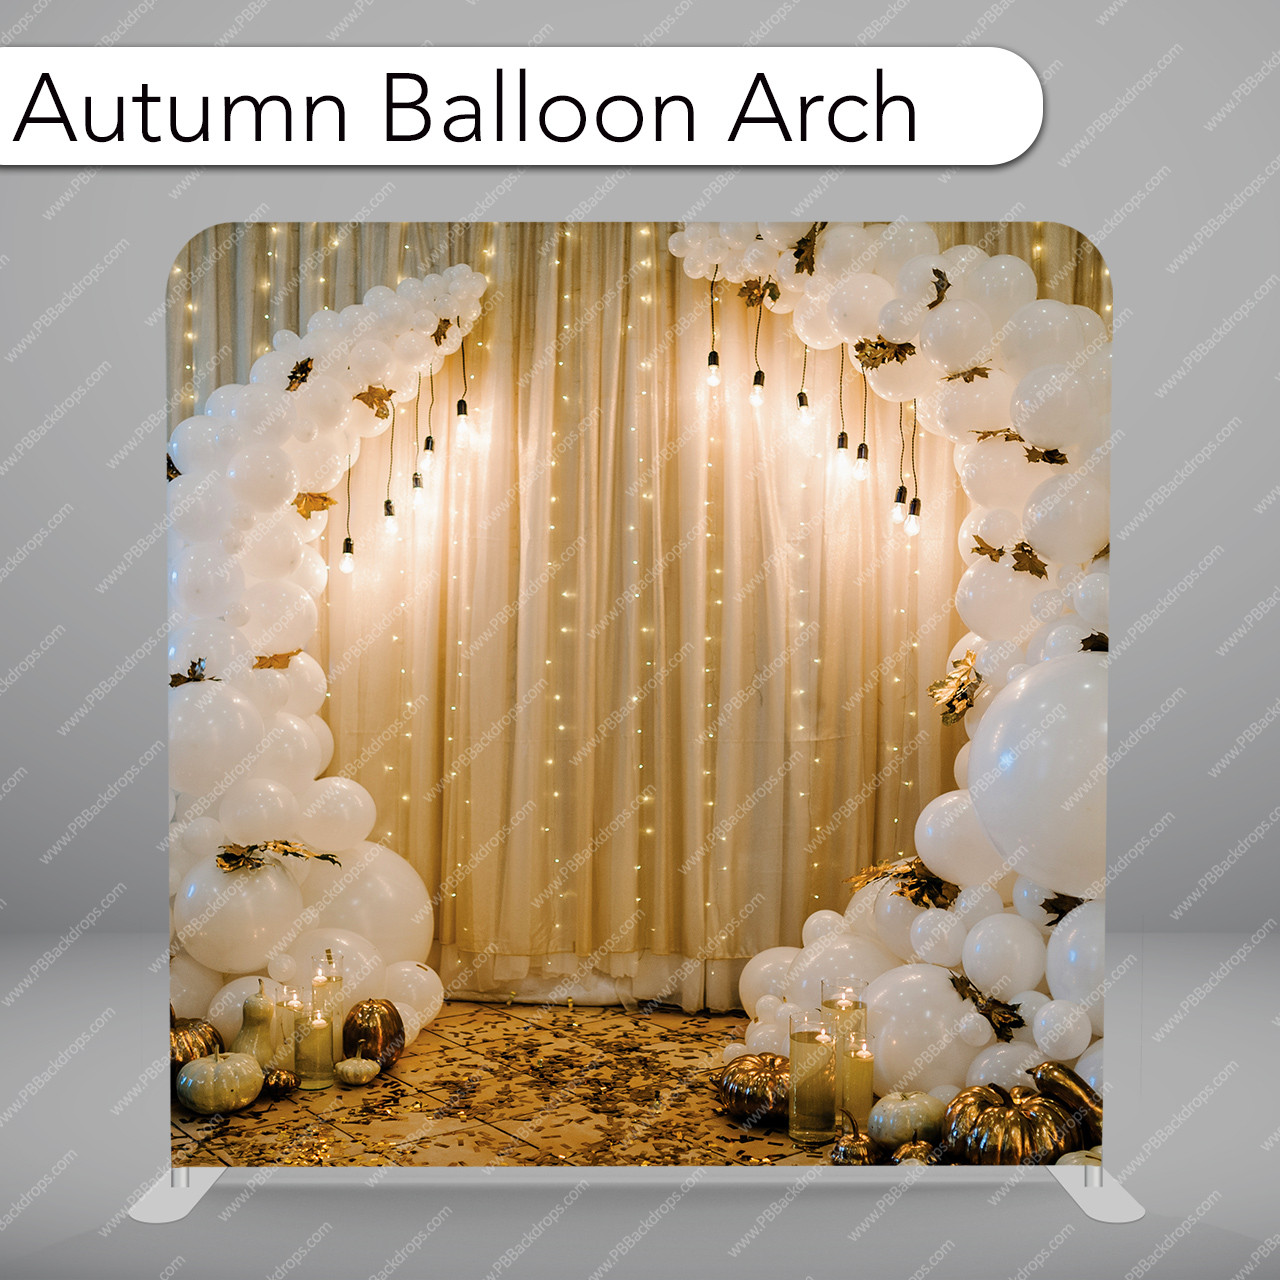 8x8 Printed Tension fabric backdrop (Autumn Painted Canvas) - PB Backdrops